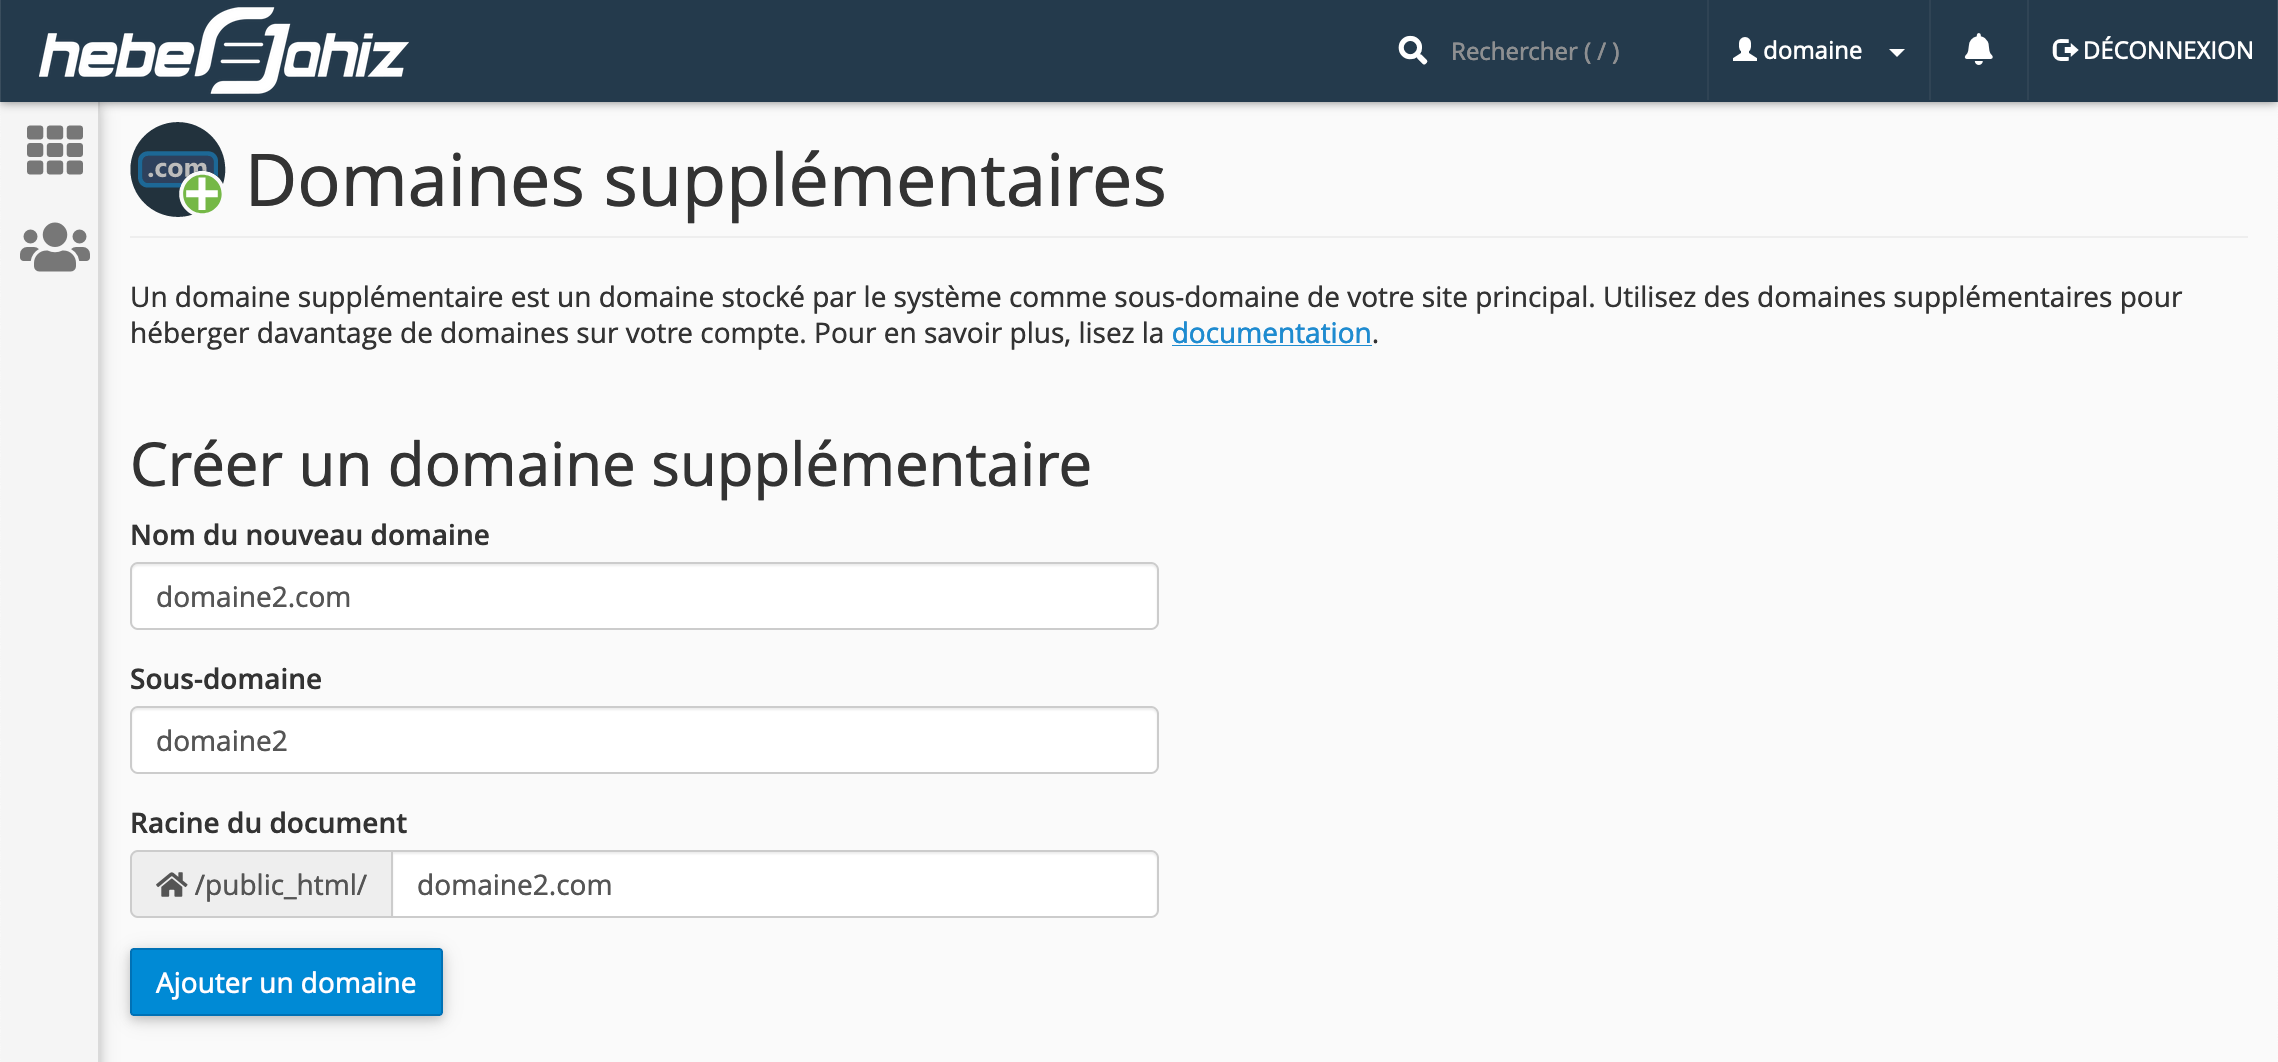 cpanel-ajouter-domaine-supplementaire.png